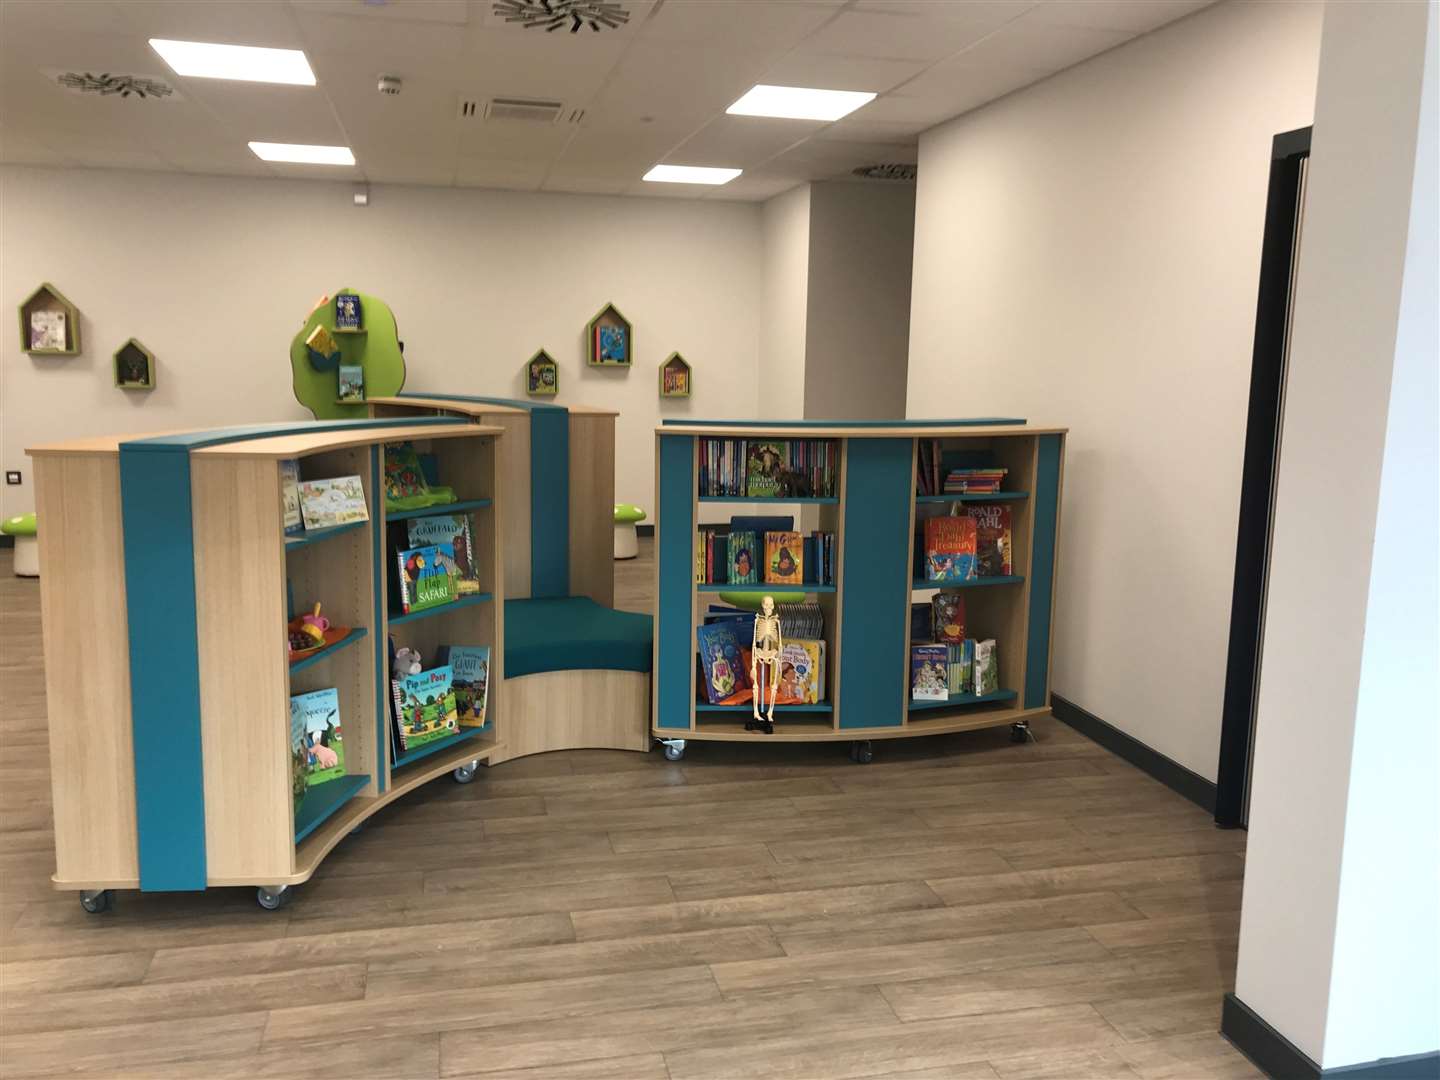 They have installed a new library for pupils. Picture:Ebbsfleet Green Primary School